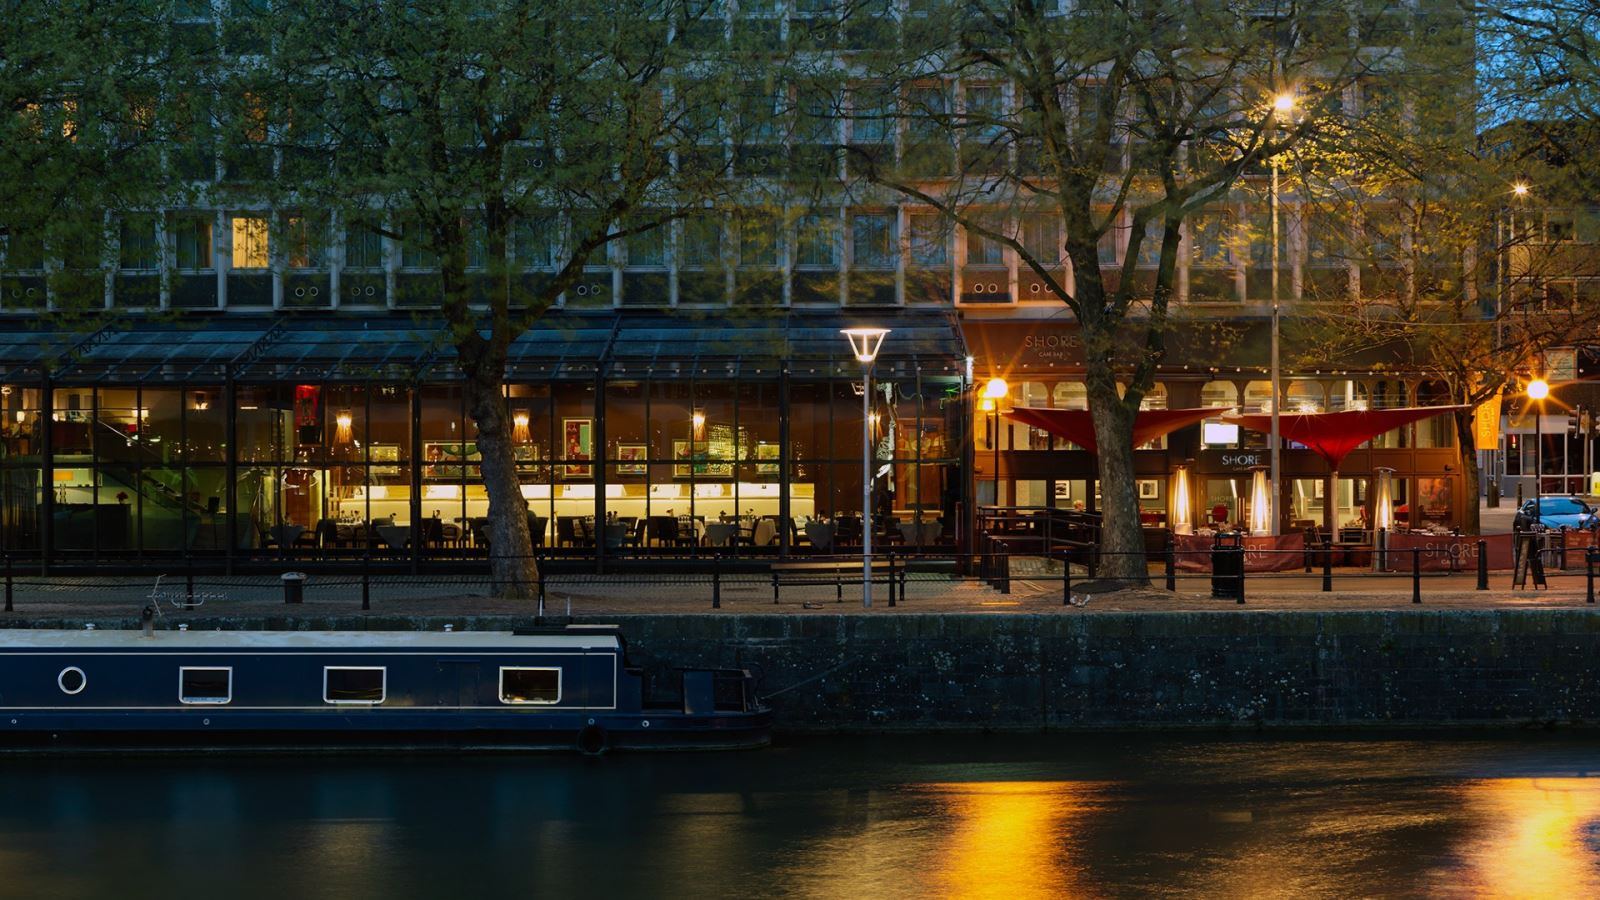 The Bristol Hotel waterfront exterior in the evening